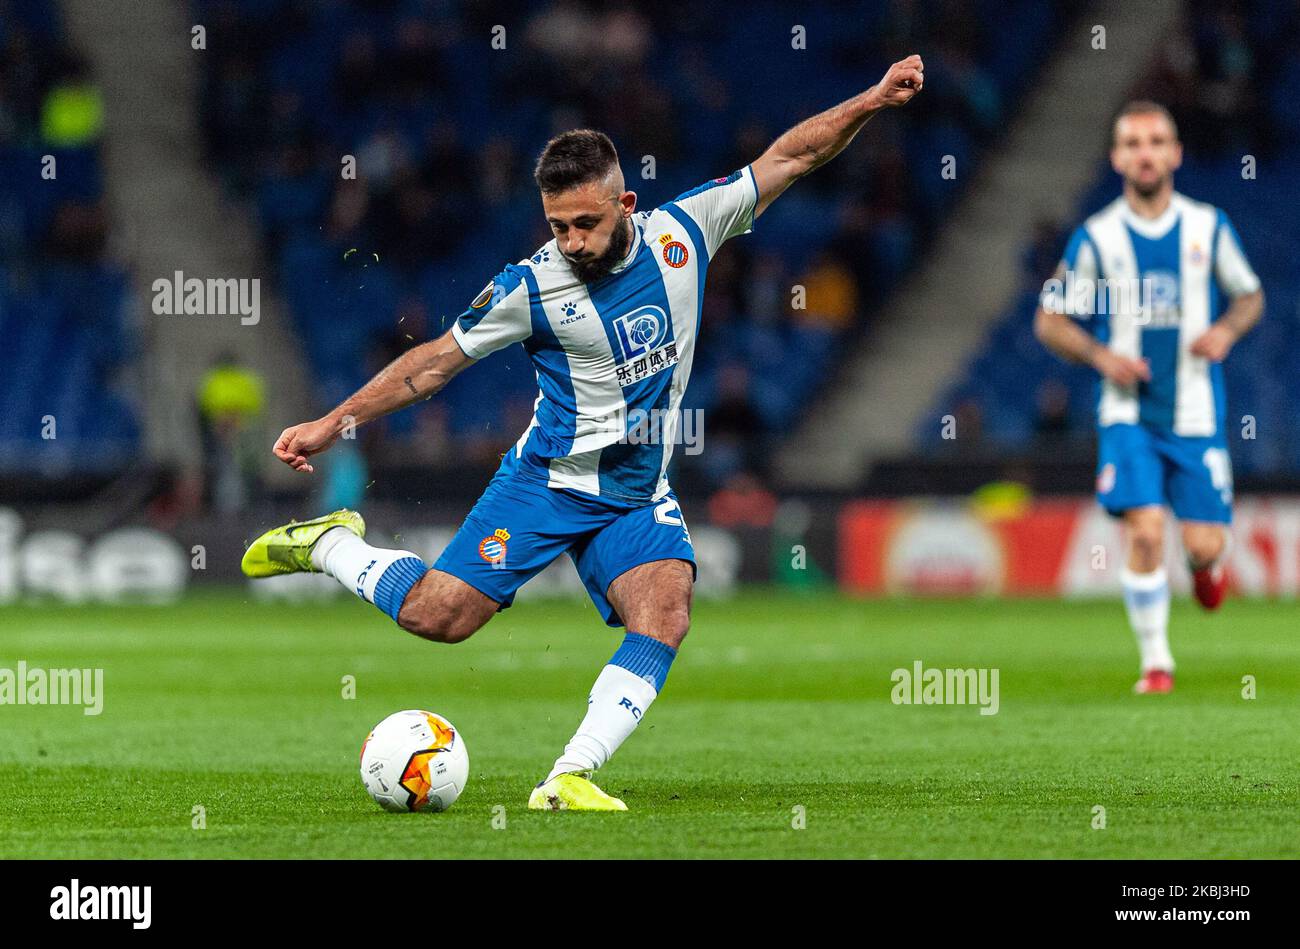 Matias Vargas during the match between RCD Espanyol and Wolverhampton Wanderers FC, corresponding to the second leg of the round of 32 of the Europa League, played at the RCDE Stadium, on 27th February 2020, in Barcelona, Spain. (Photo by Xavier Ballart/Urbanandsport/NurPhoto) Stock Photo